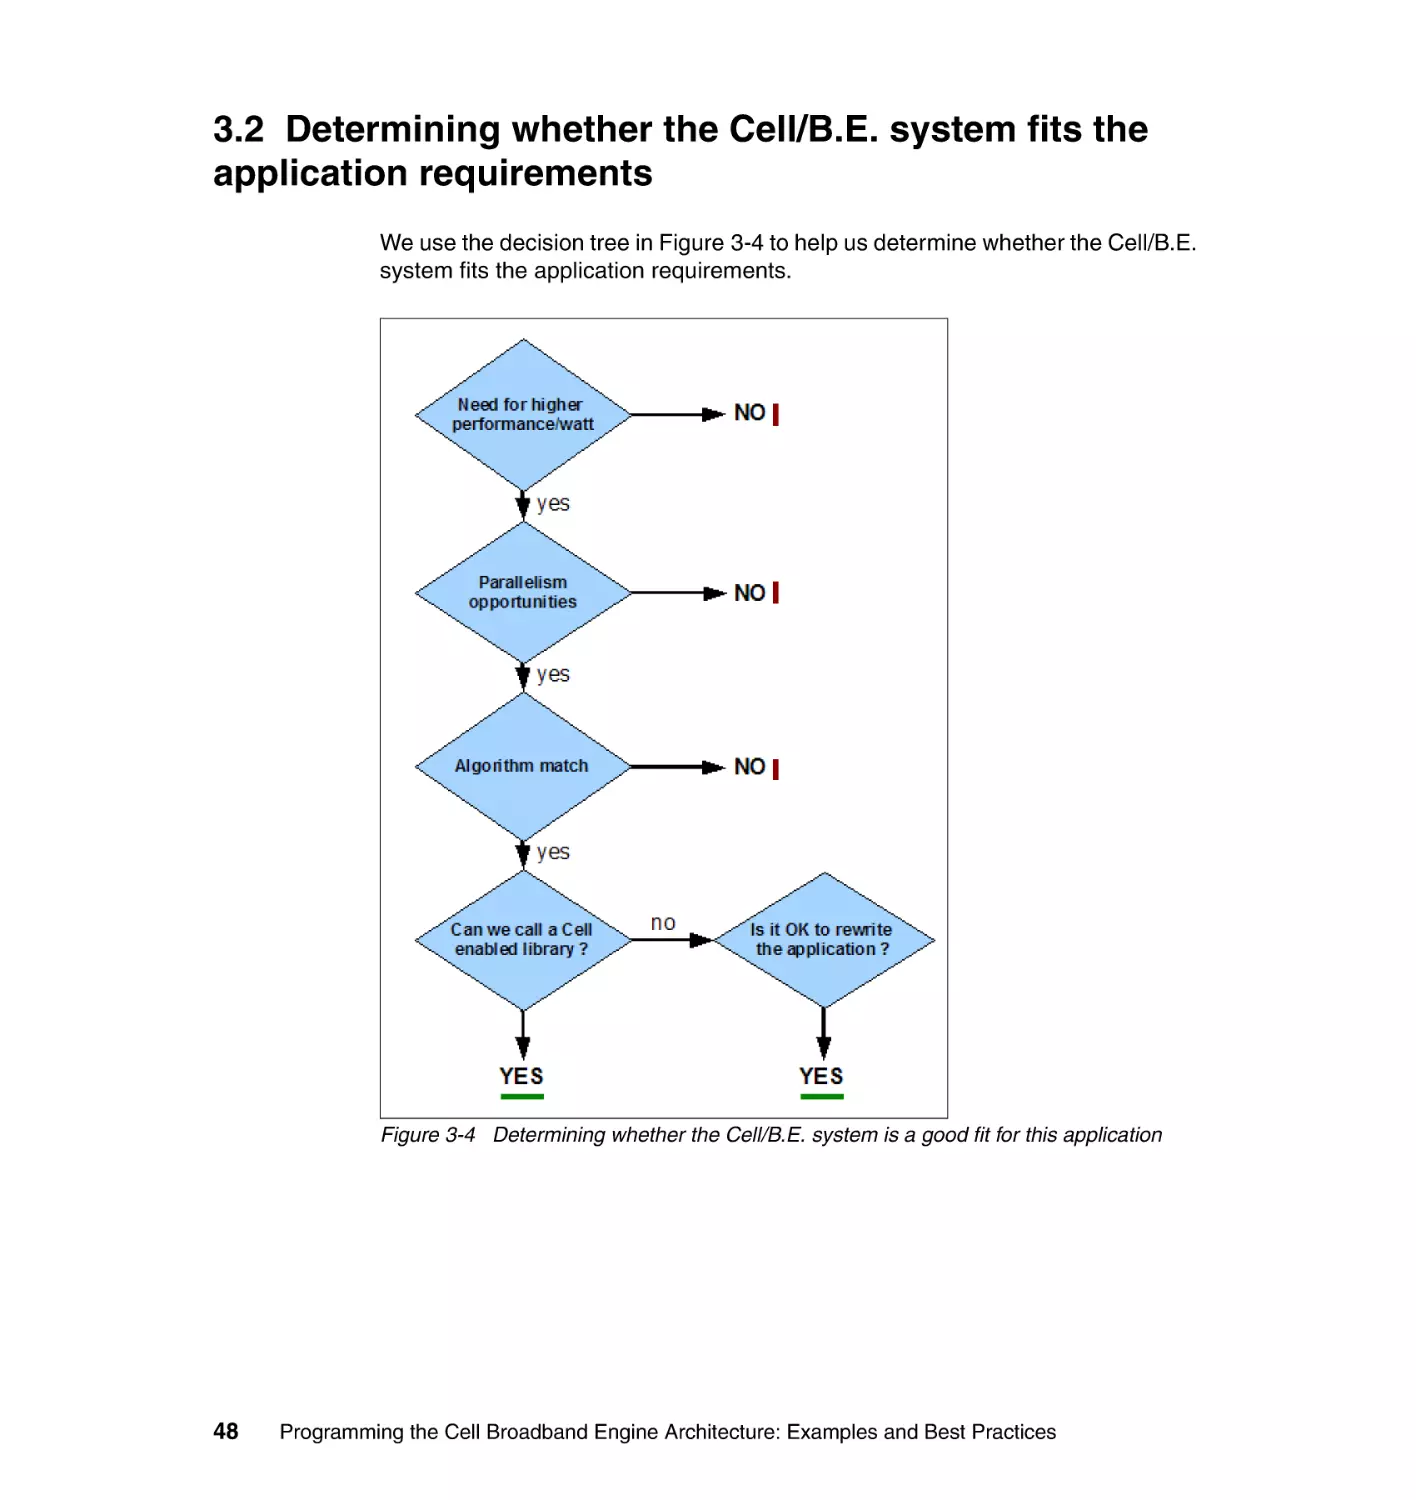 3.2 Determining whether the Cell/B.E. system fits the application requirements